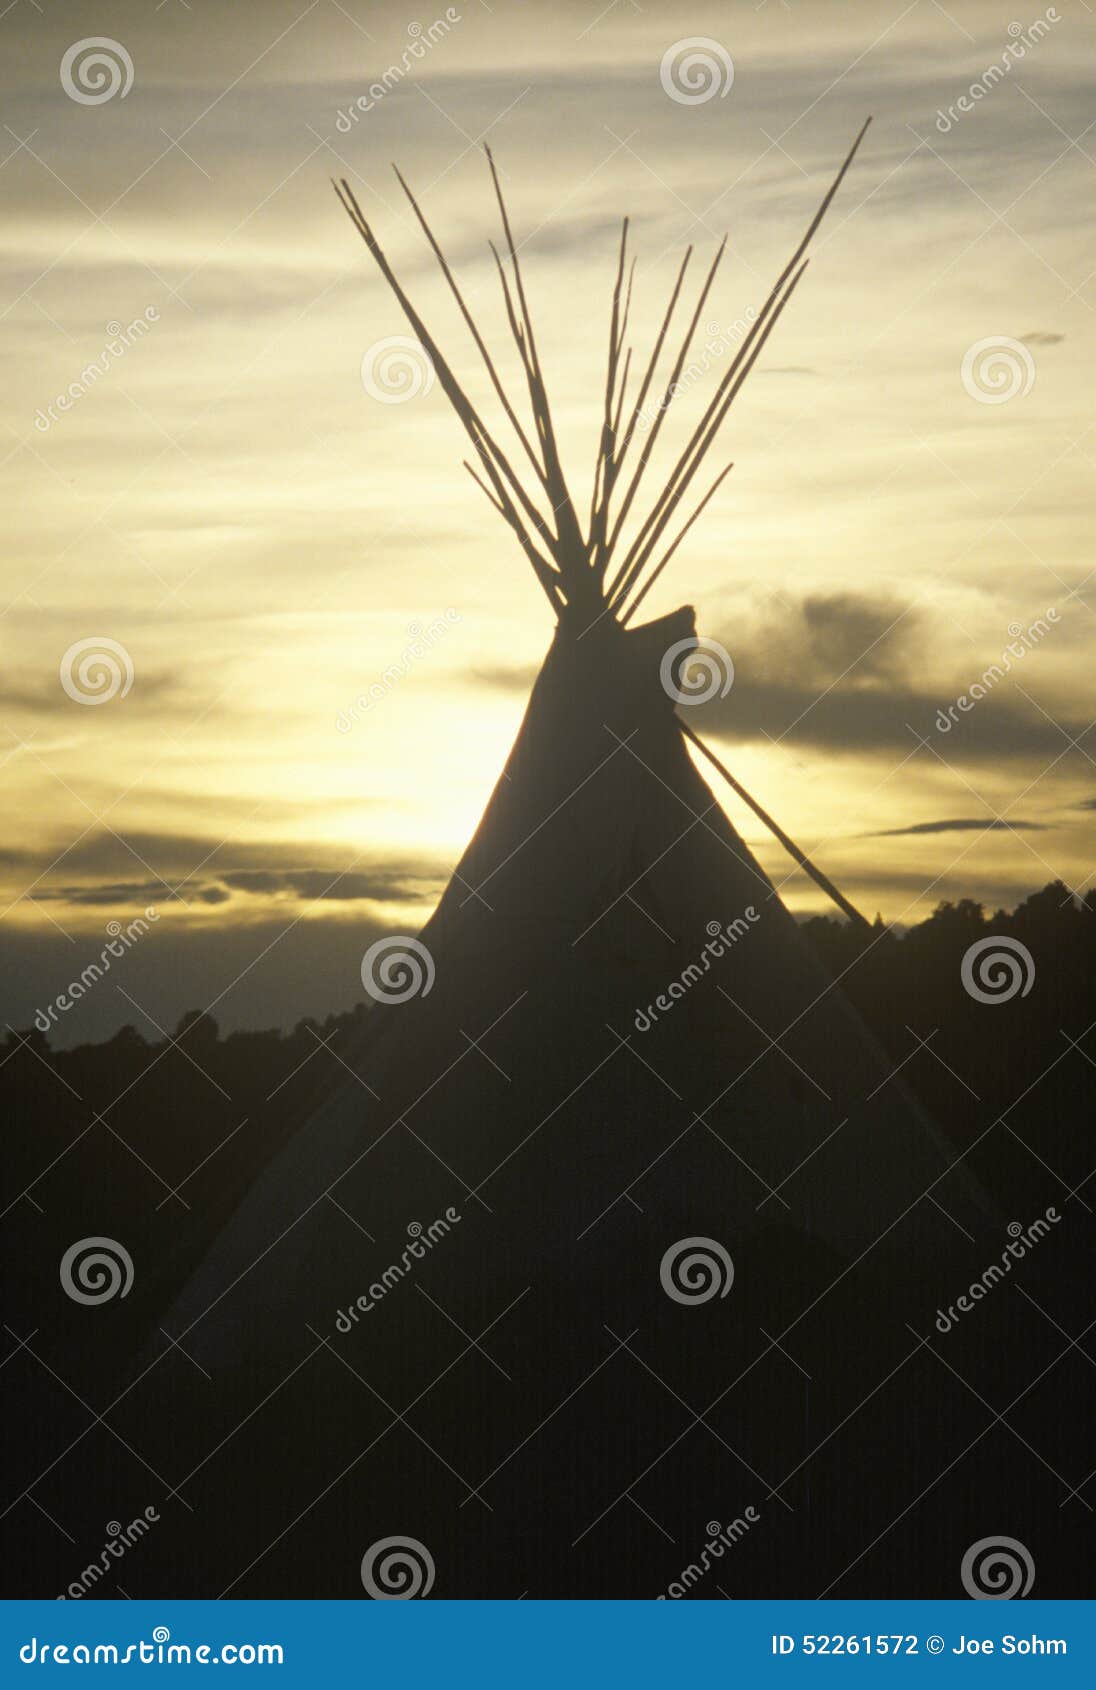 teepee silhouetted at dusk in taos, nm